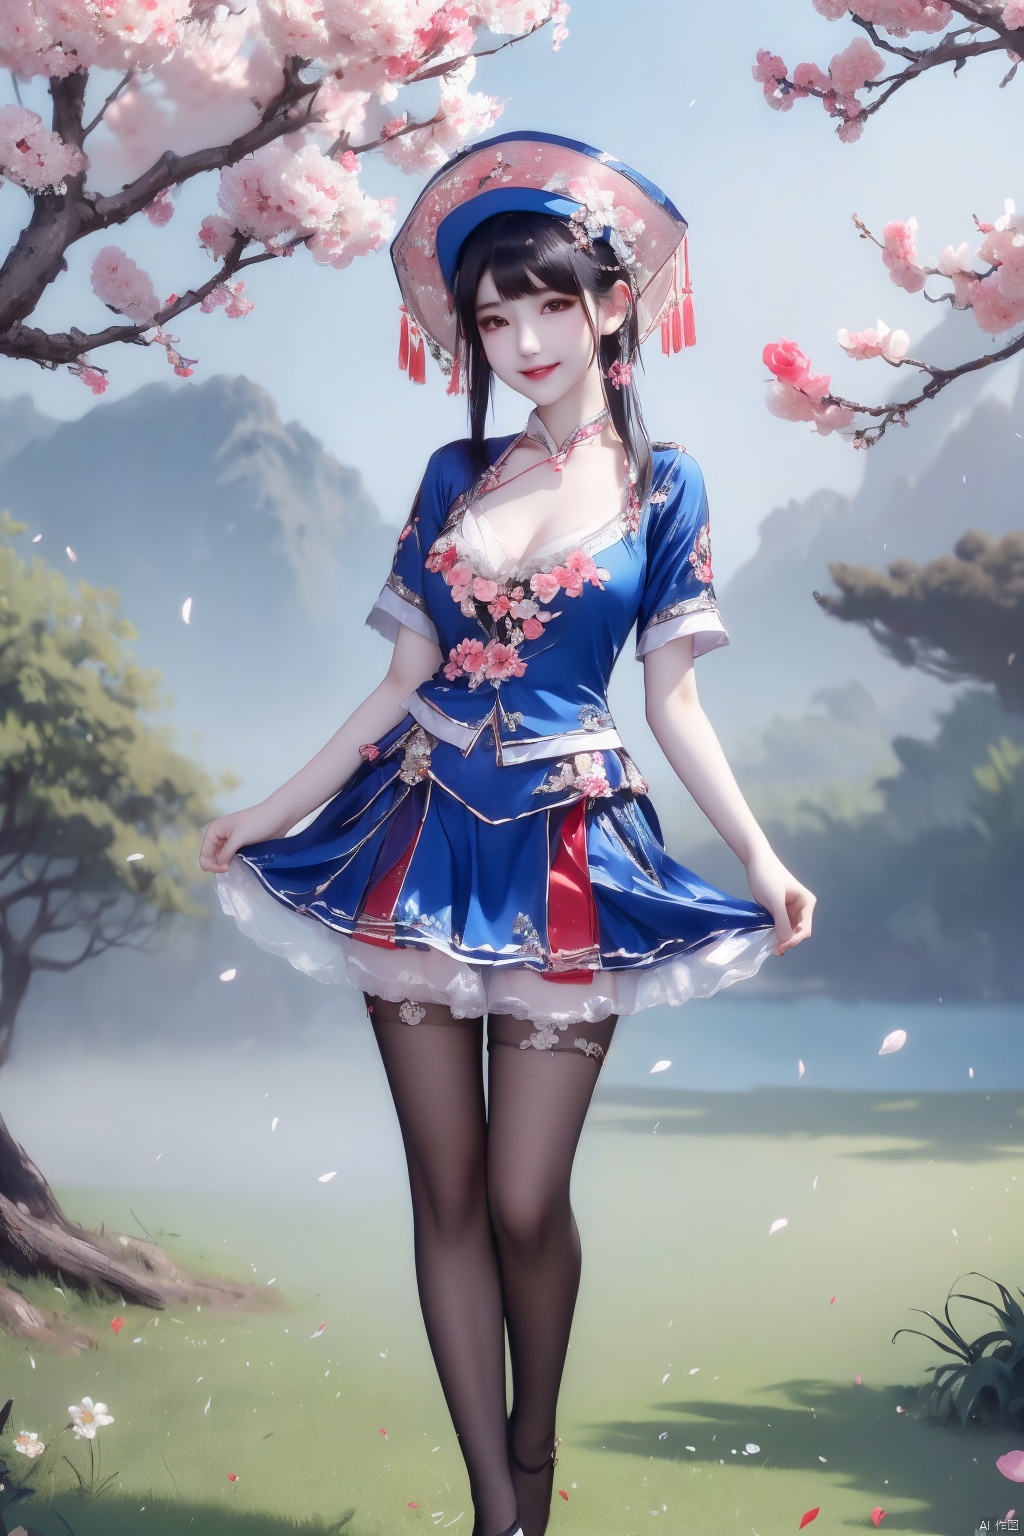  zhuangzu, 1girl, solo, hat, many flowers,petal,branch,white background, outdoor, skirt, looking at viewer, smile,tears,nude,naked,bare breasts,bare *****,breasts,*****,blue pantyhose,no panties,full body,blue_legwear